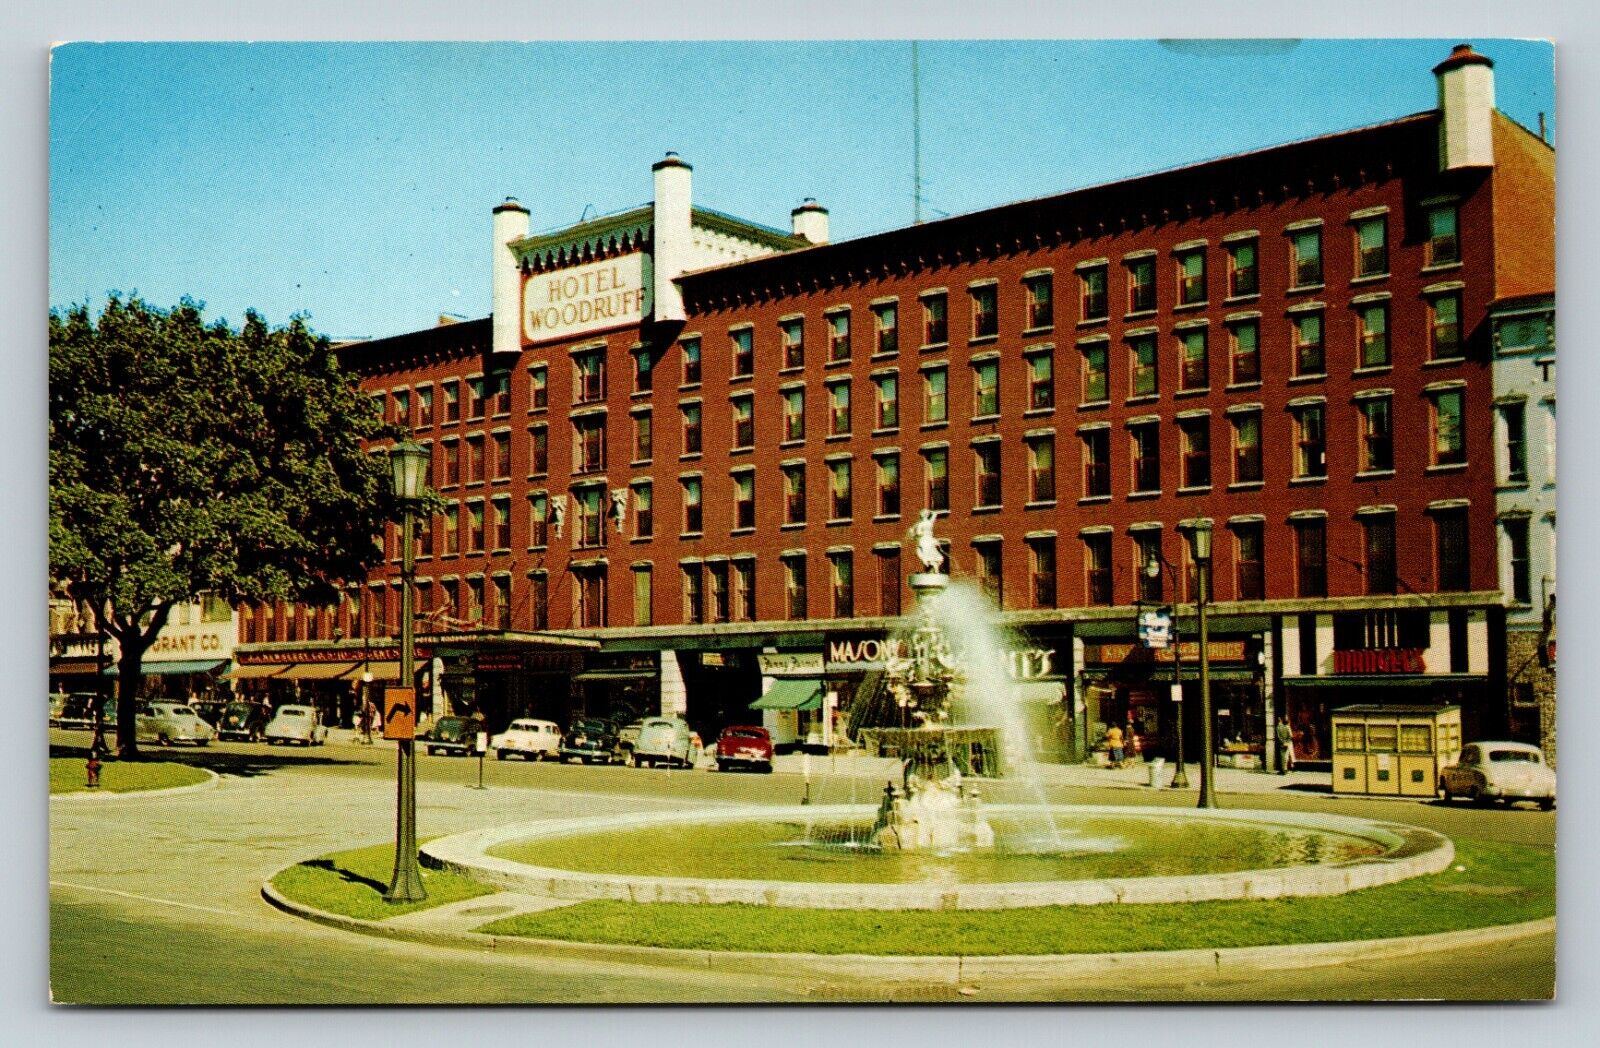 Hotel Woodruff, Fountain & Classic Cars Watertown NY VINTAGE Postcard